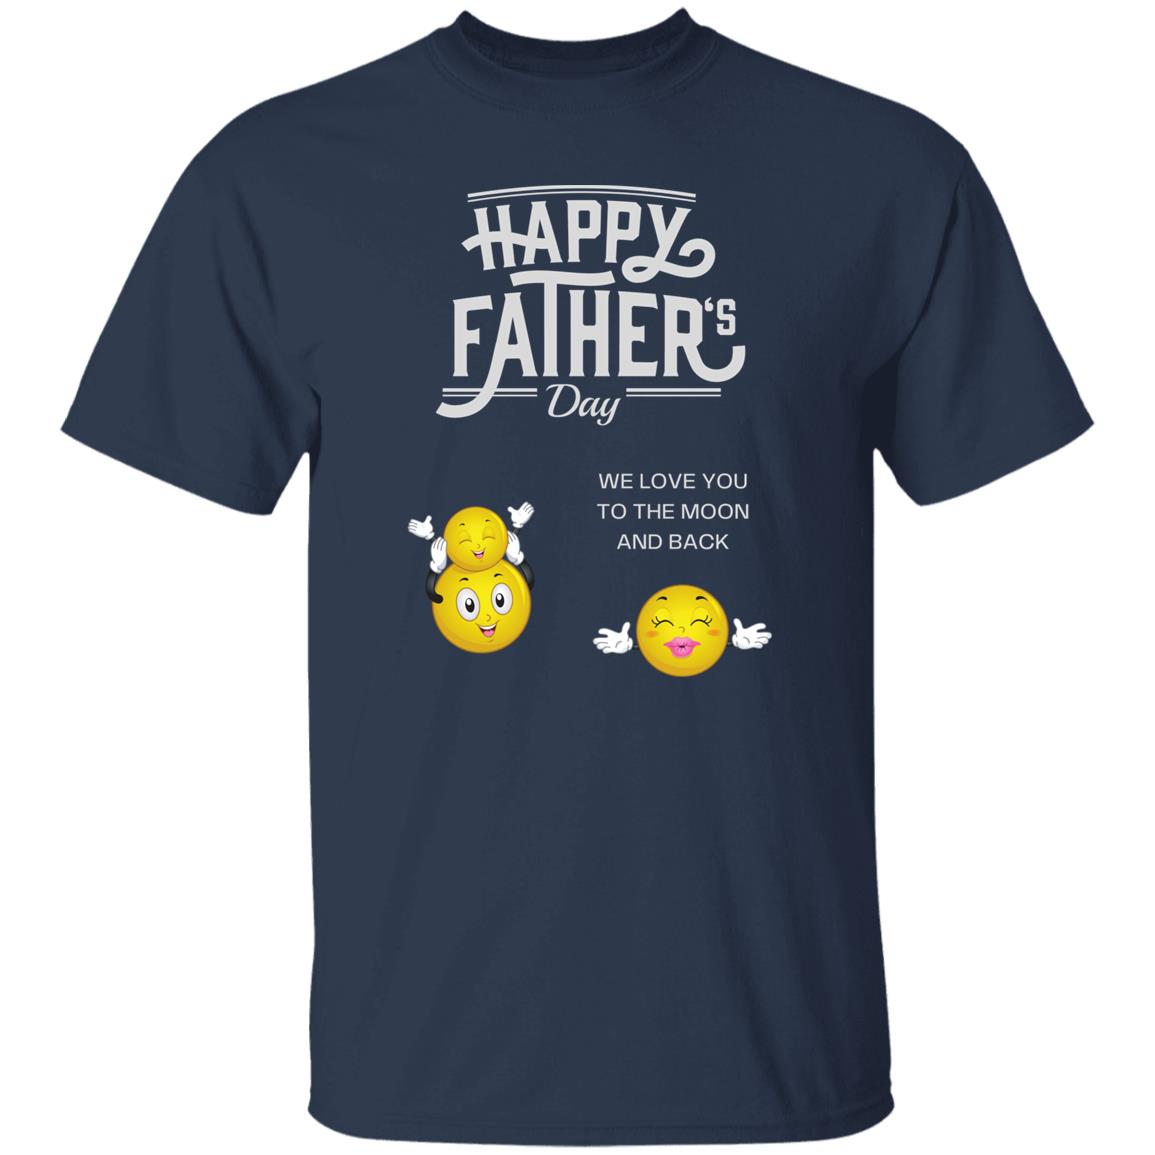 Happy Father's Day - short sleeve